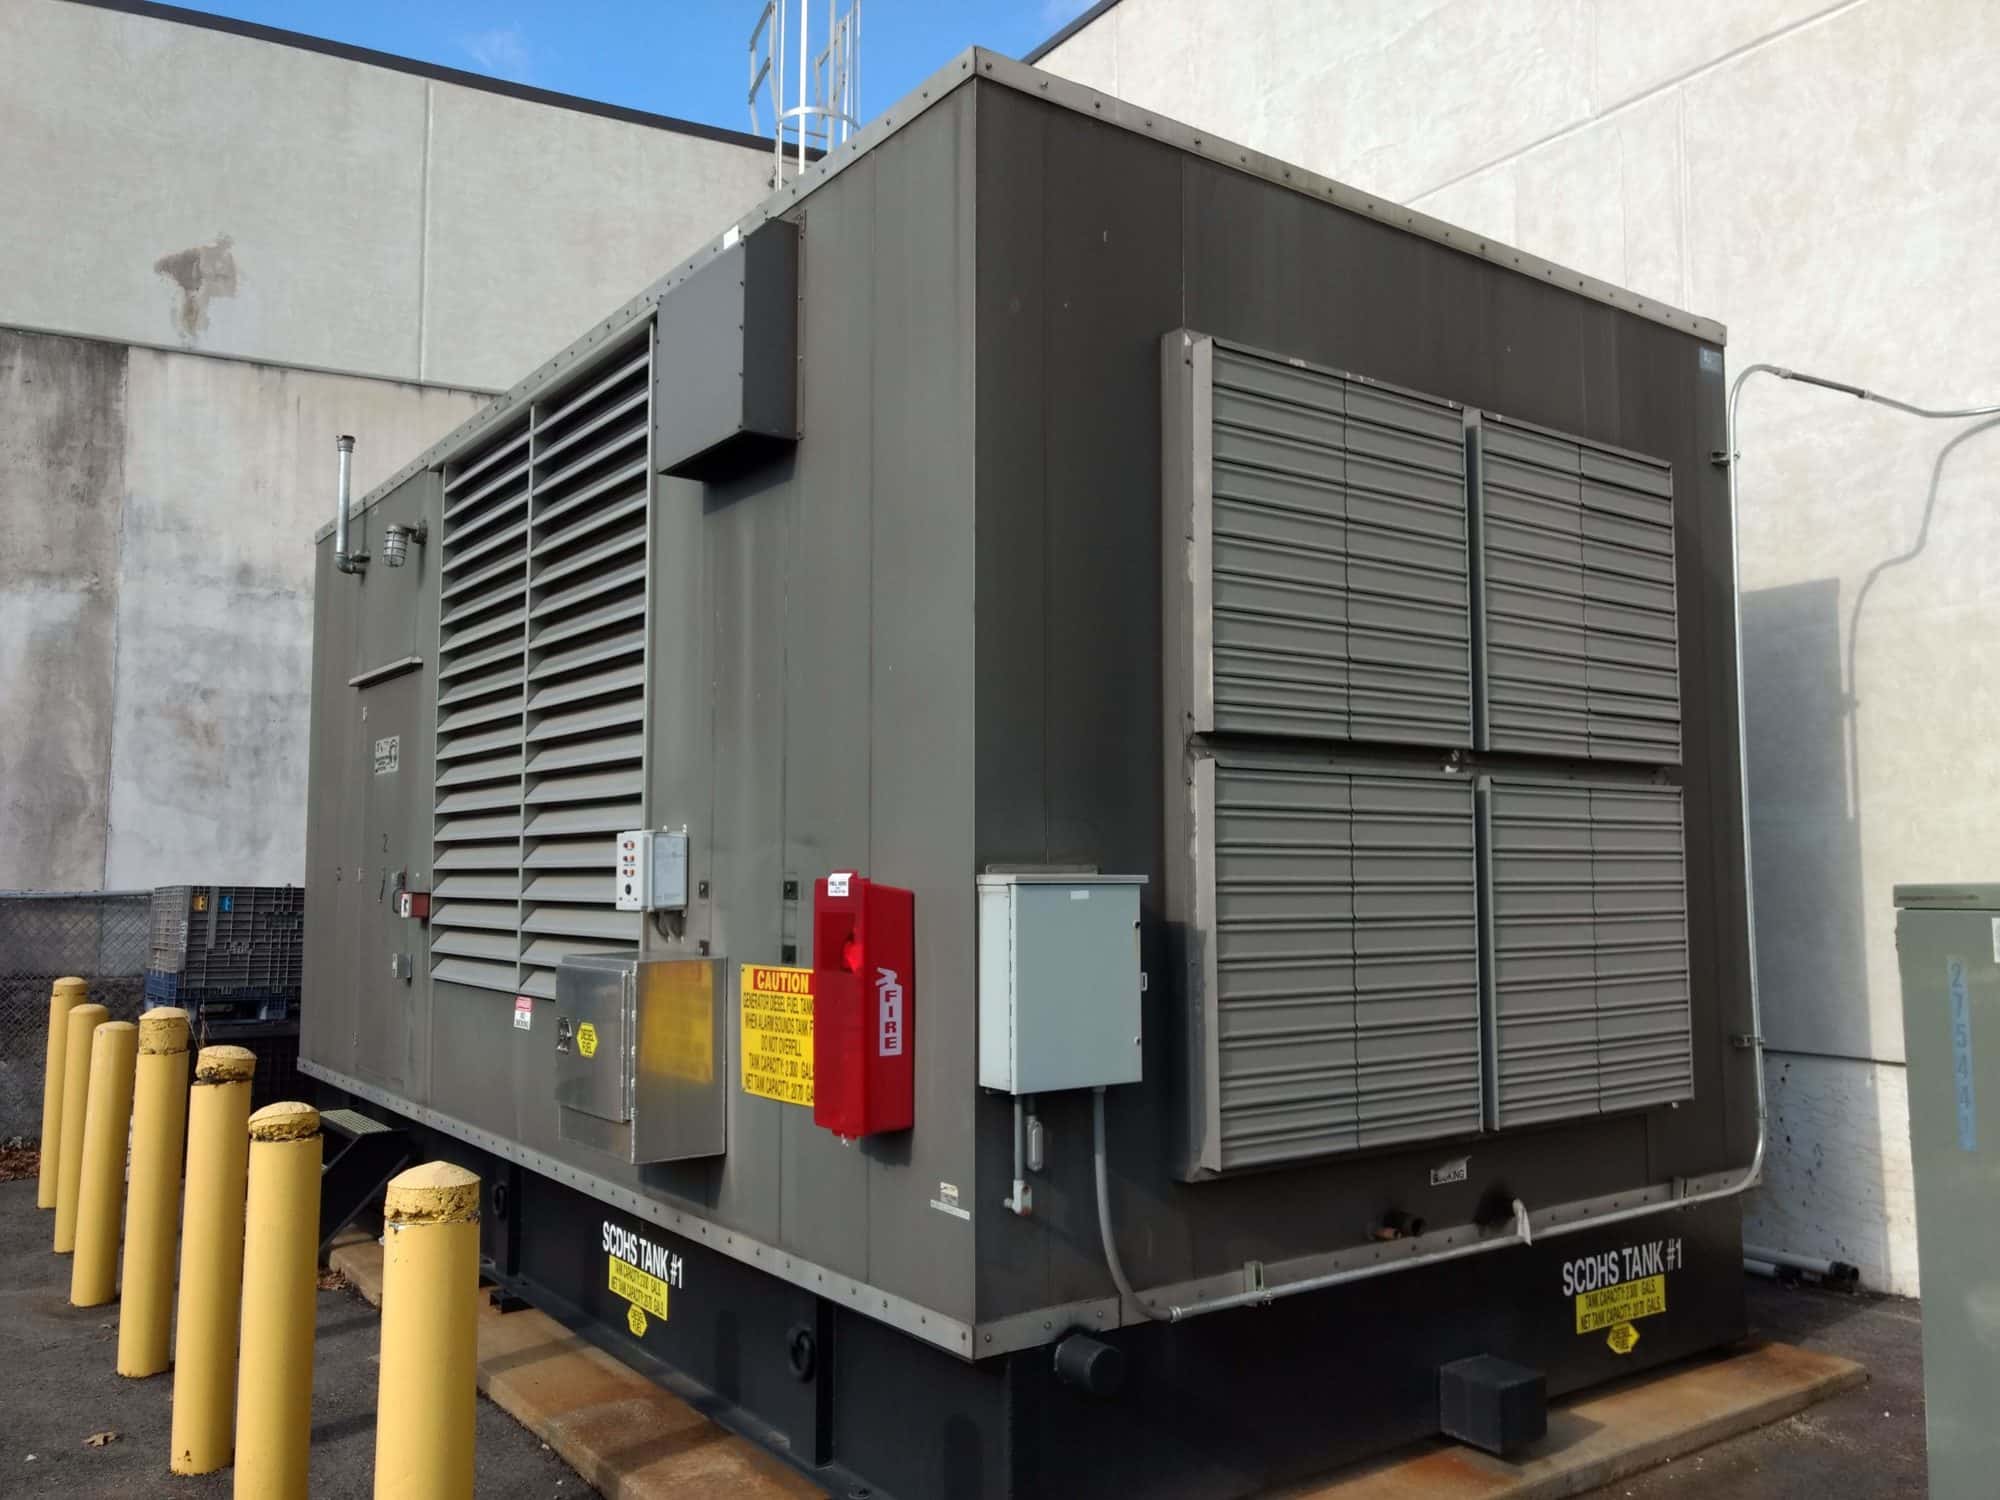 Considerations for emergency generator systems